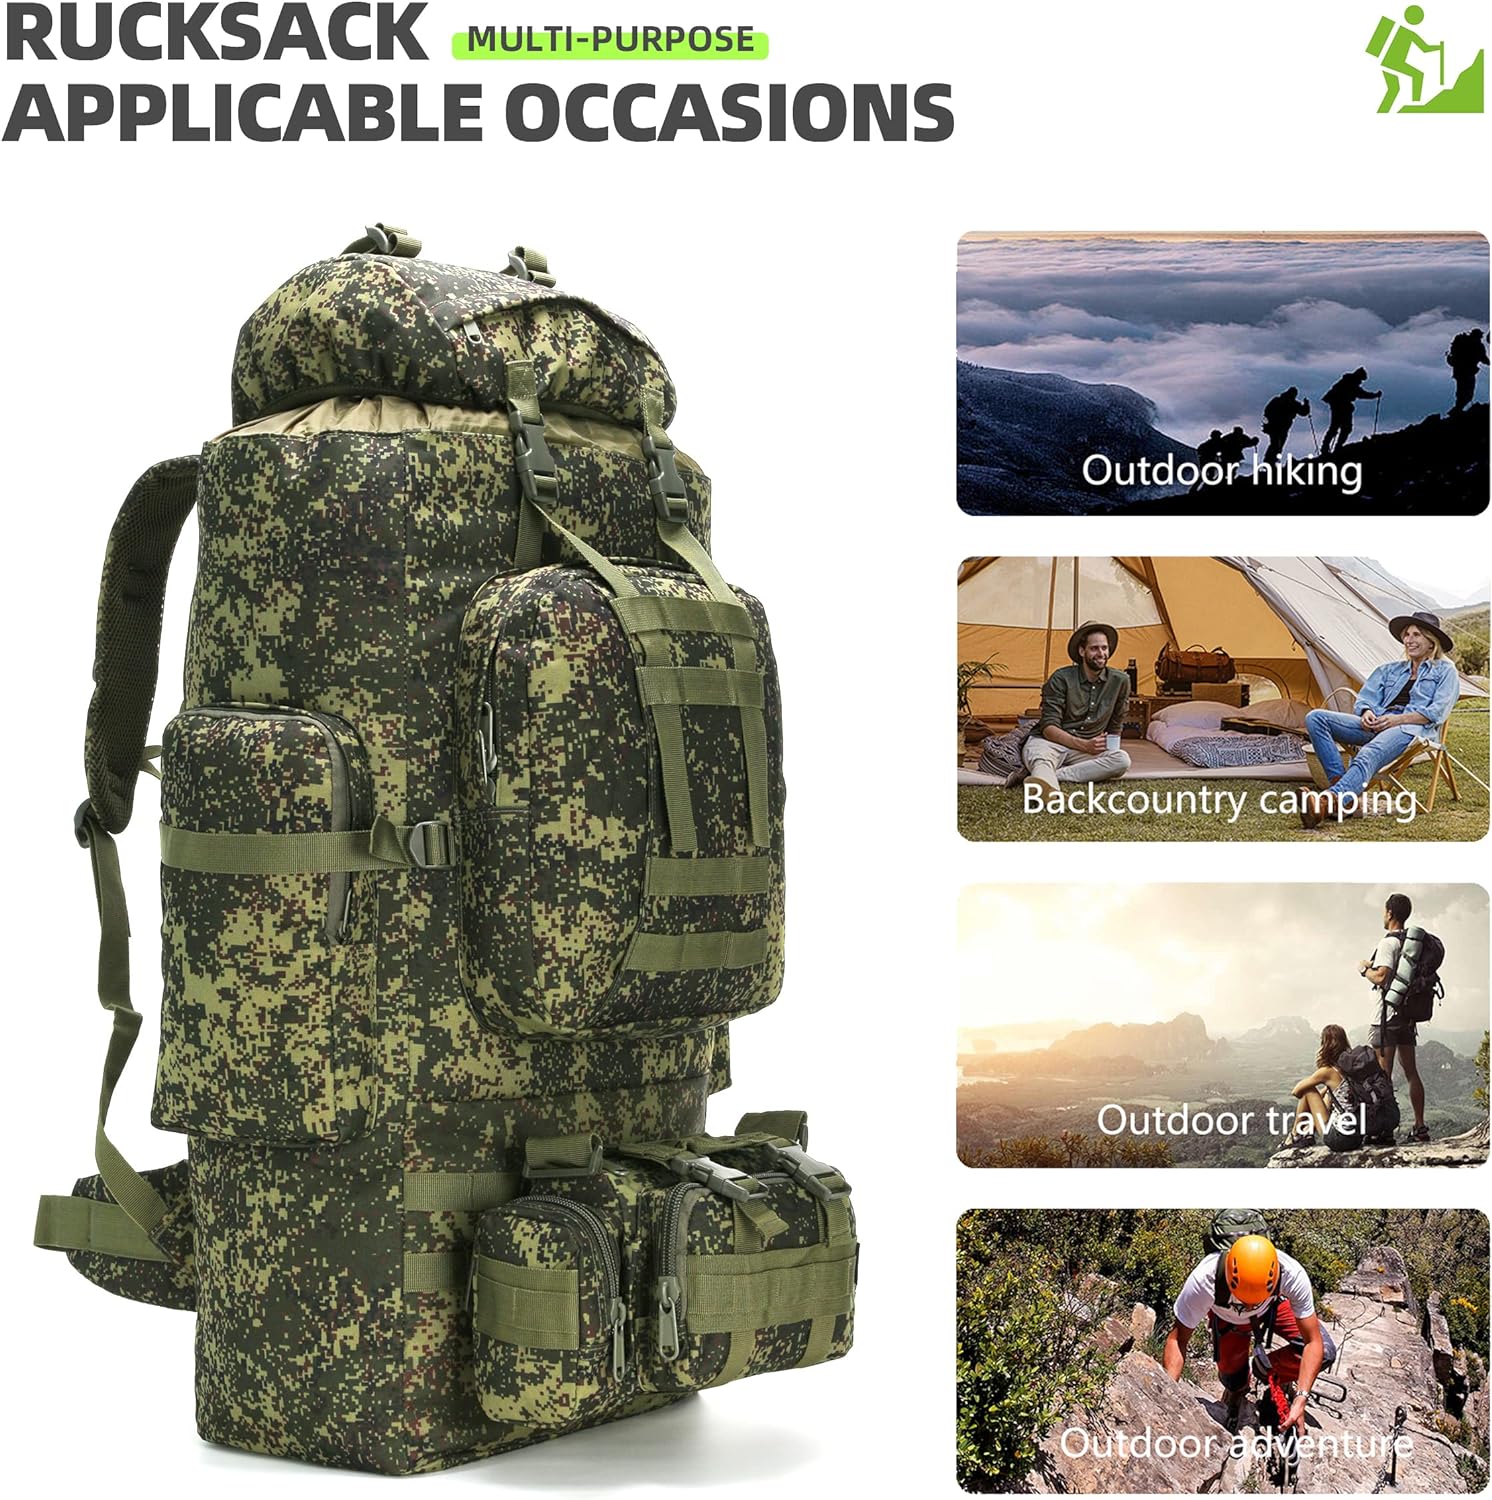 KingsGuard 100L Camping Hiking Backpack Molle Rucksack Military Camping Backpacking Daypack (CP Camo)